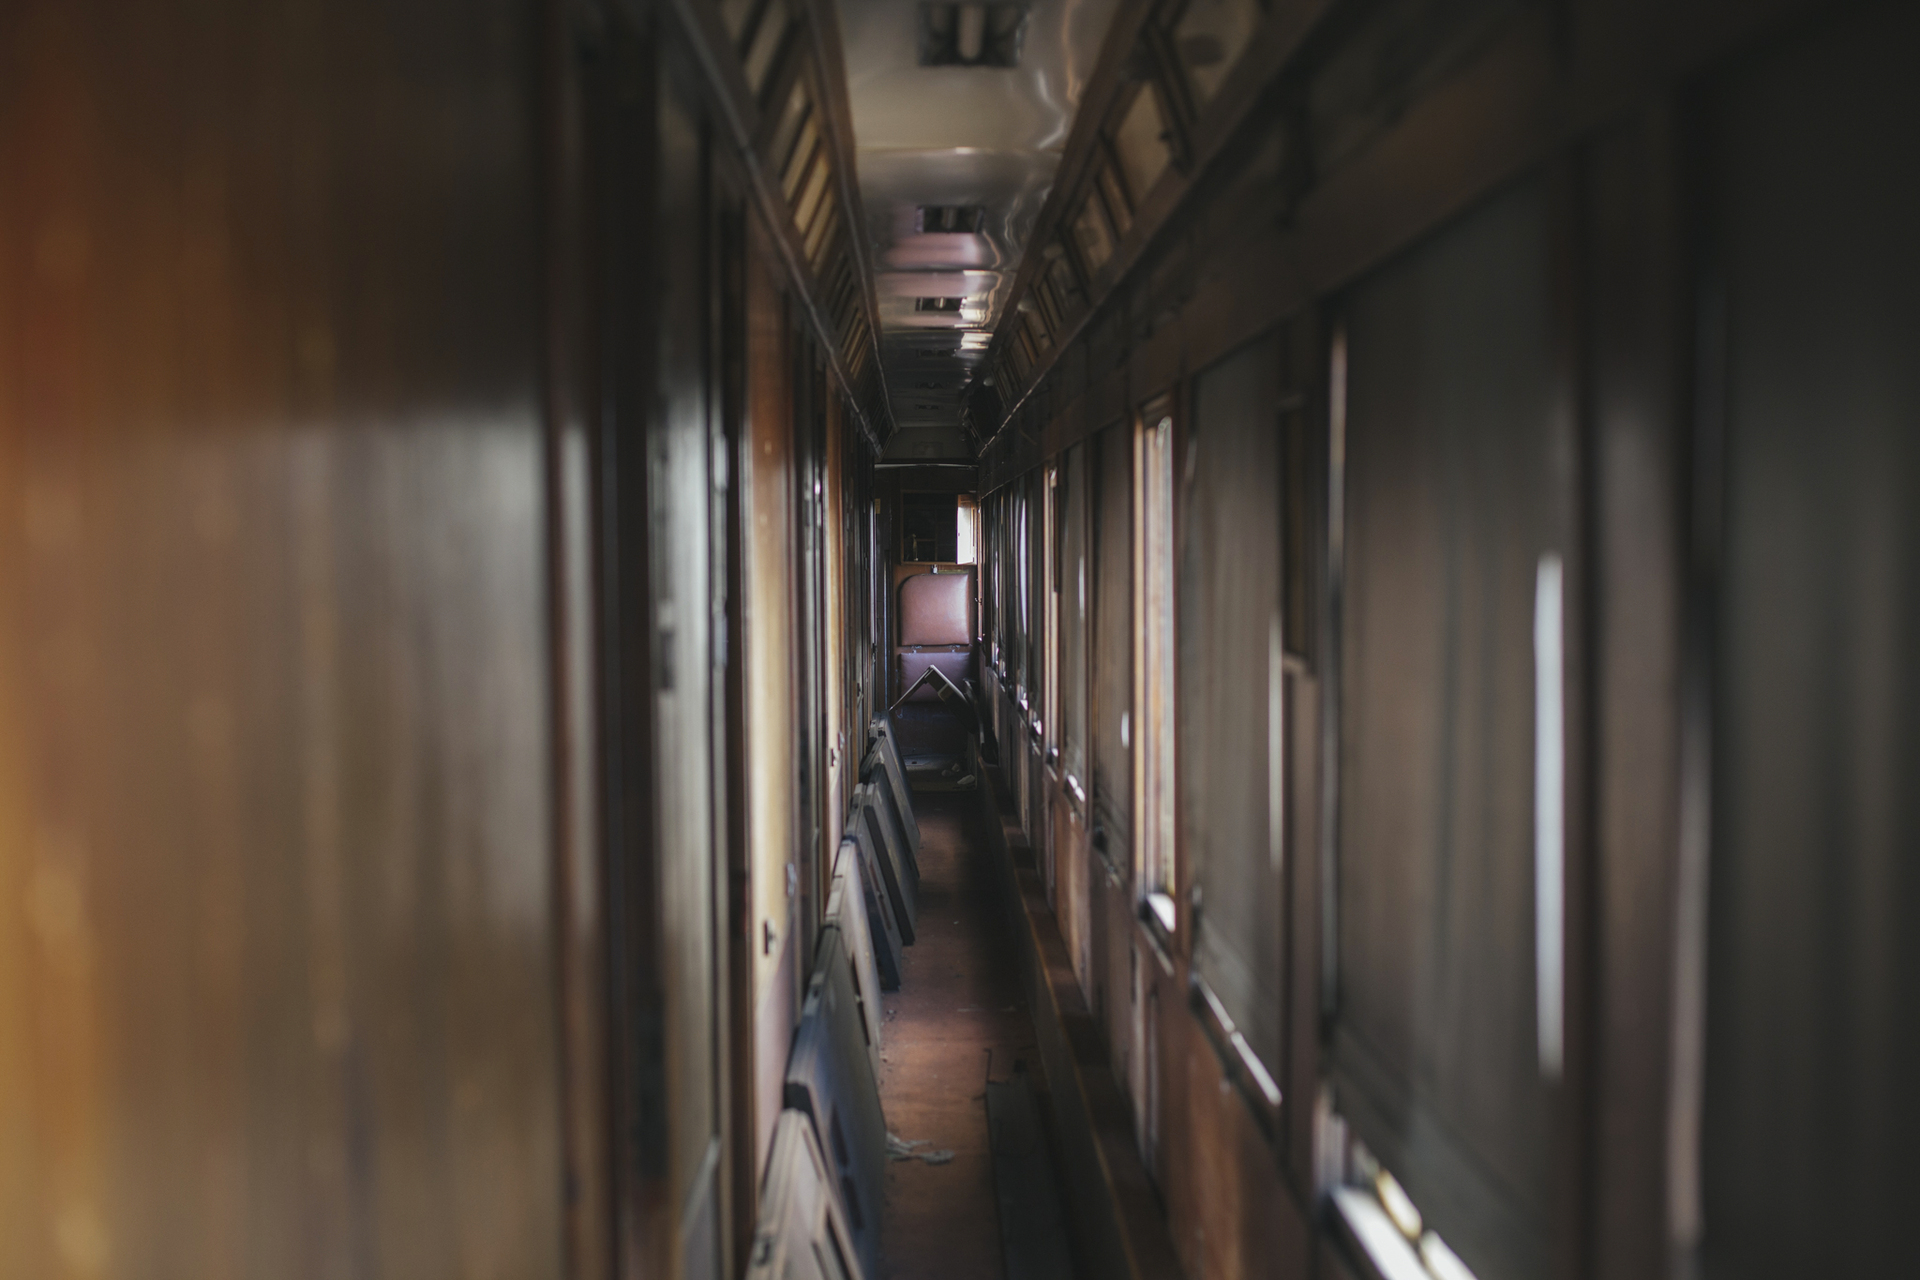 Spectacular interiors of rediscovered Orient Express carriages revealed